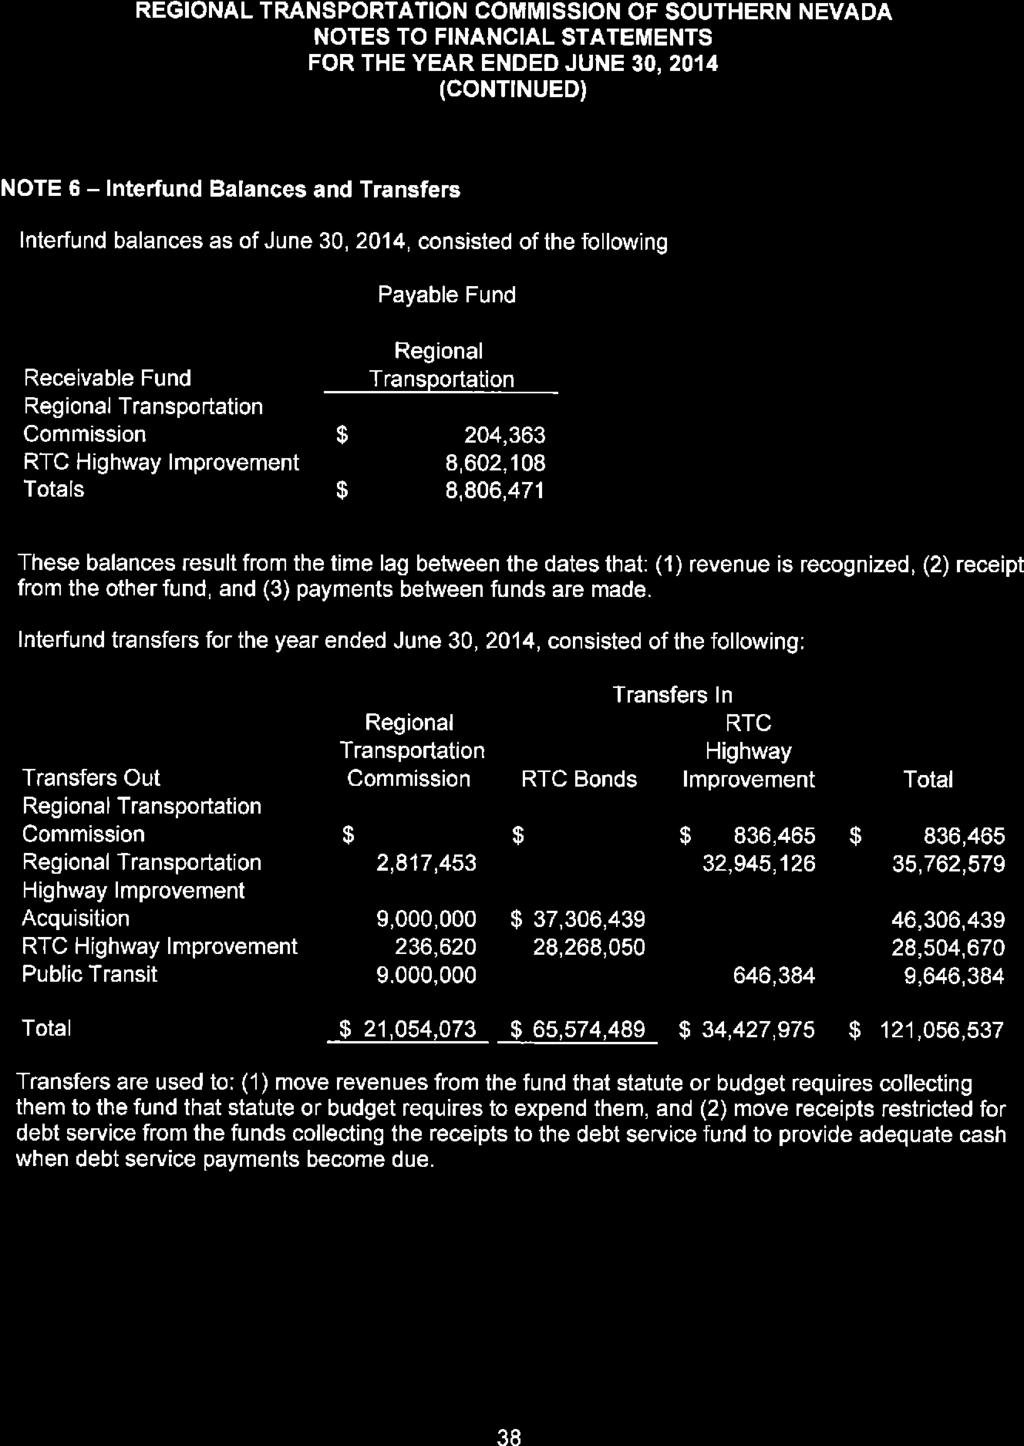 REGIONAL TRANSPORTATION COMMISSION OF SOUTHERN NEVADA NOTES TO FINANCIAL STATEMENTS FOR THE YEAR ENDED JUNE 30,2014 (conttnued) NOTE 6 - lnterfund Balances and Transfers lnterfund balances as of June